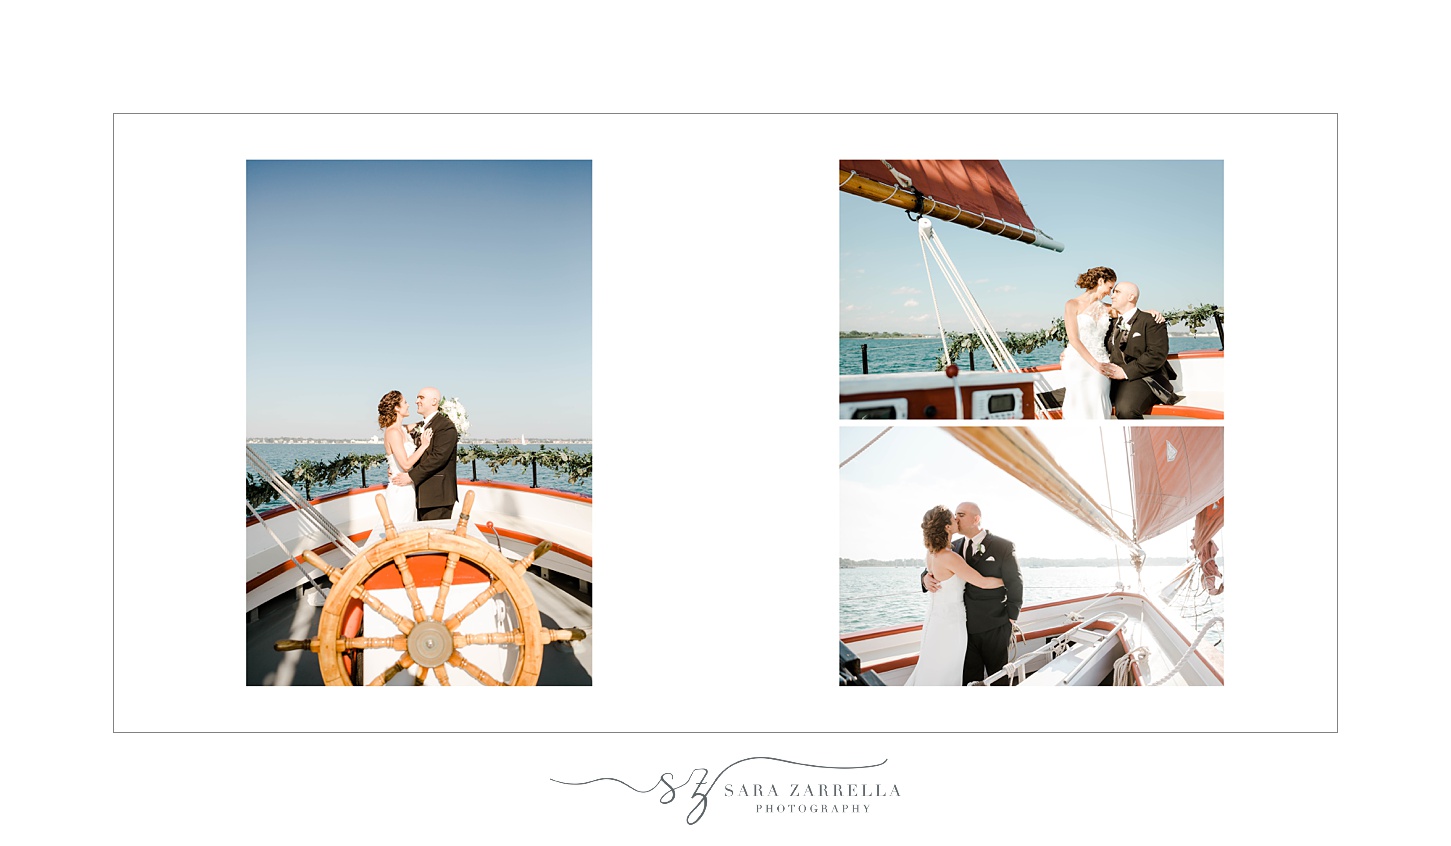 storybook album from Regatta Place wedding with portraits at The Elms designed by Sara Zarrella Photography